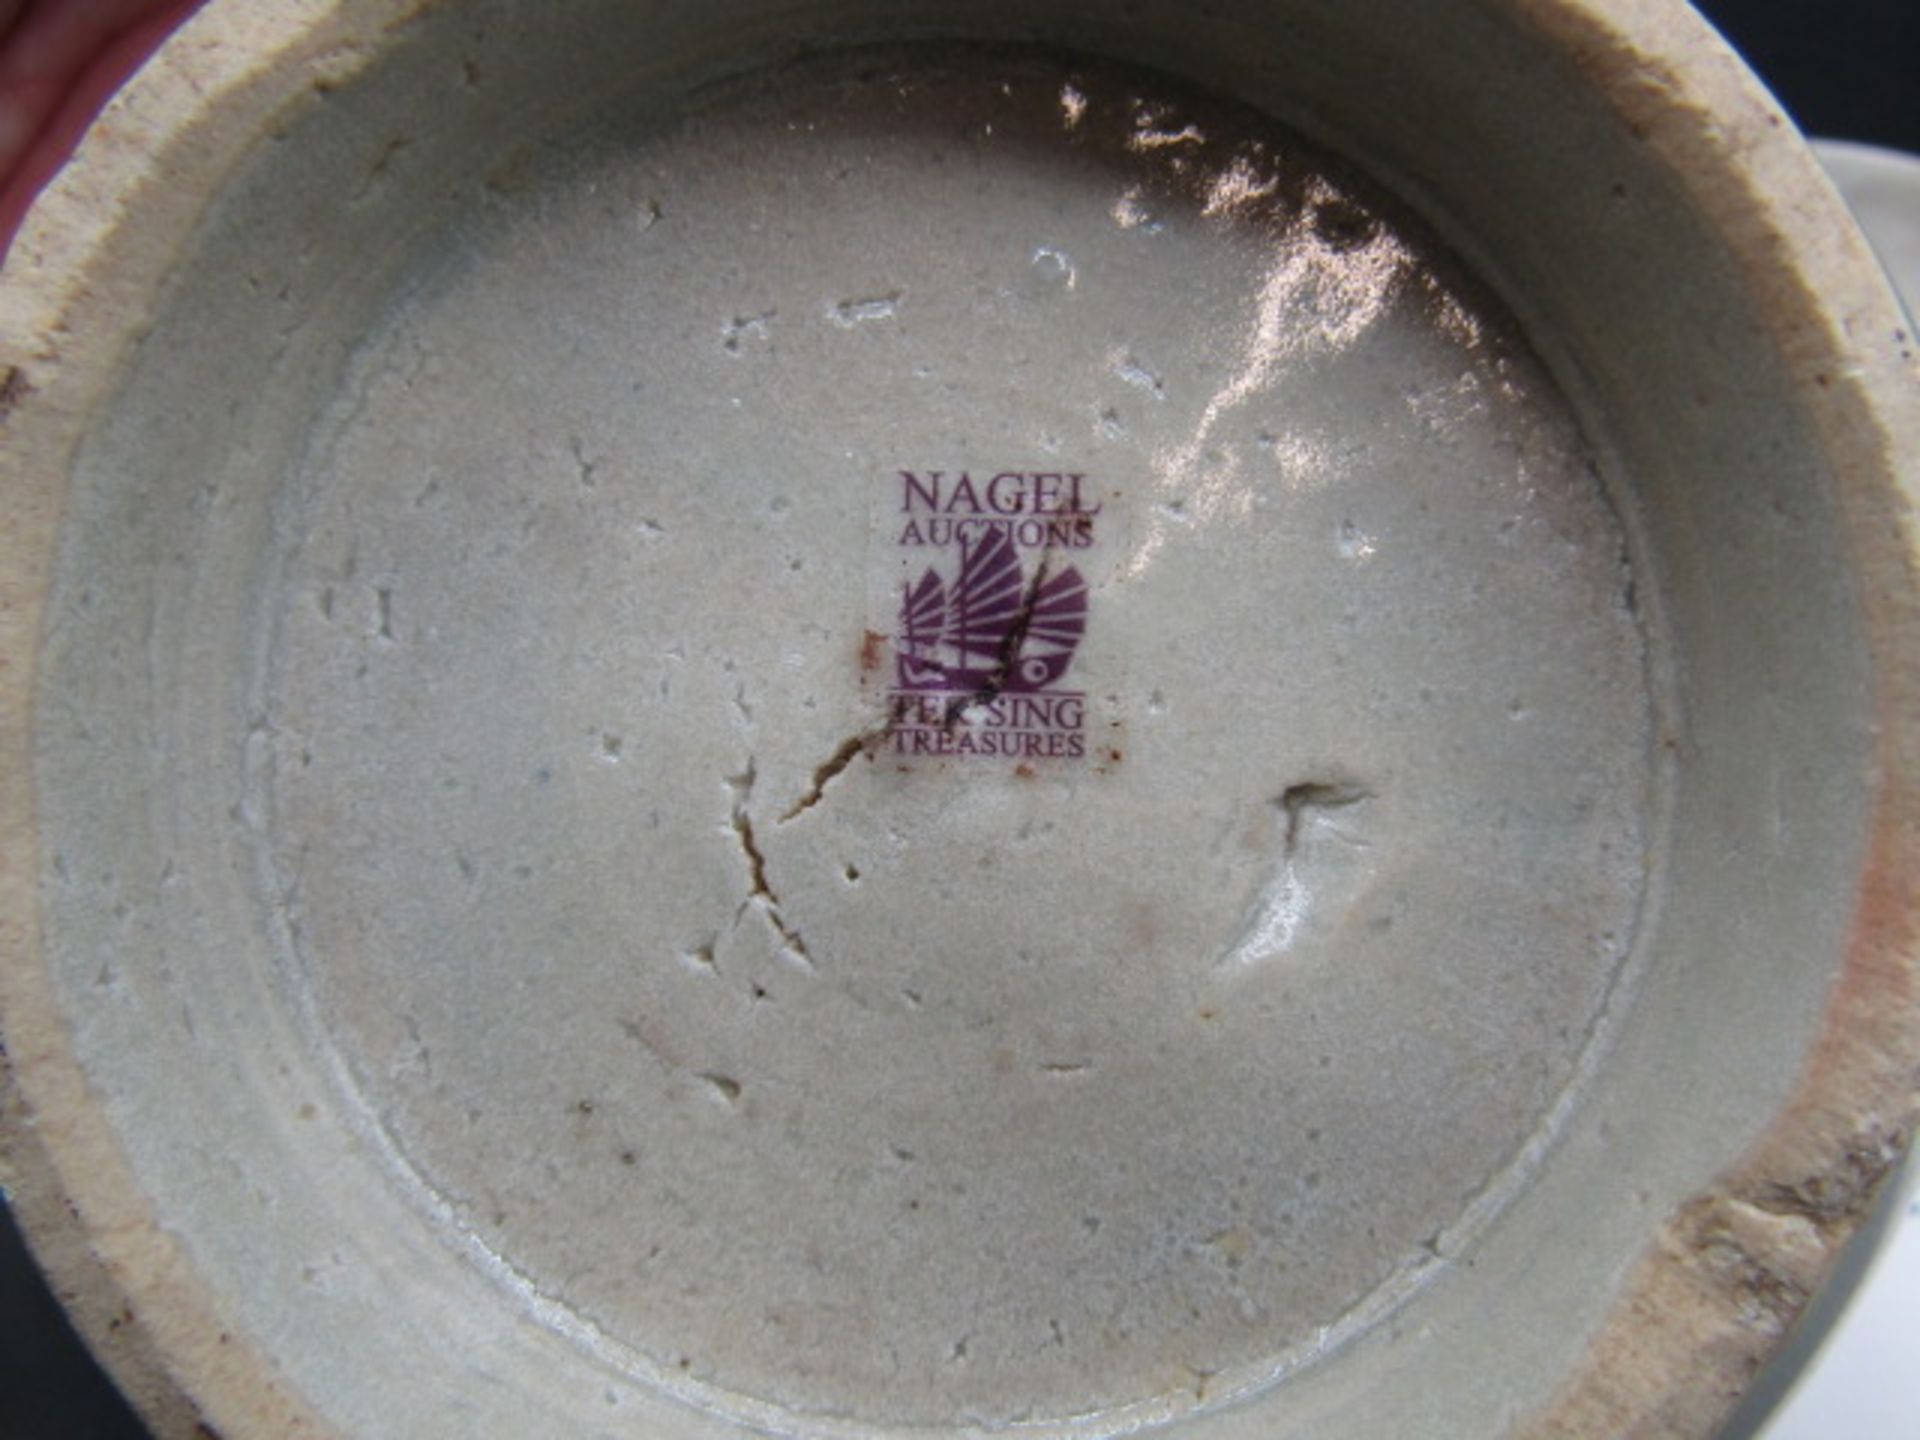 Tek Sing ship wrecked porcelain with c.o.a from the wreckage in 1822, recovered in 1999 - Image 4 of 4